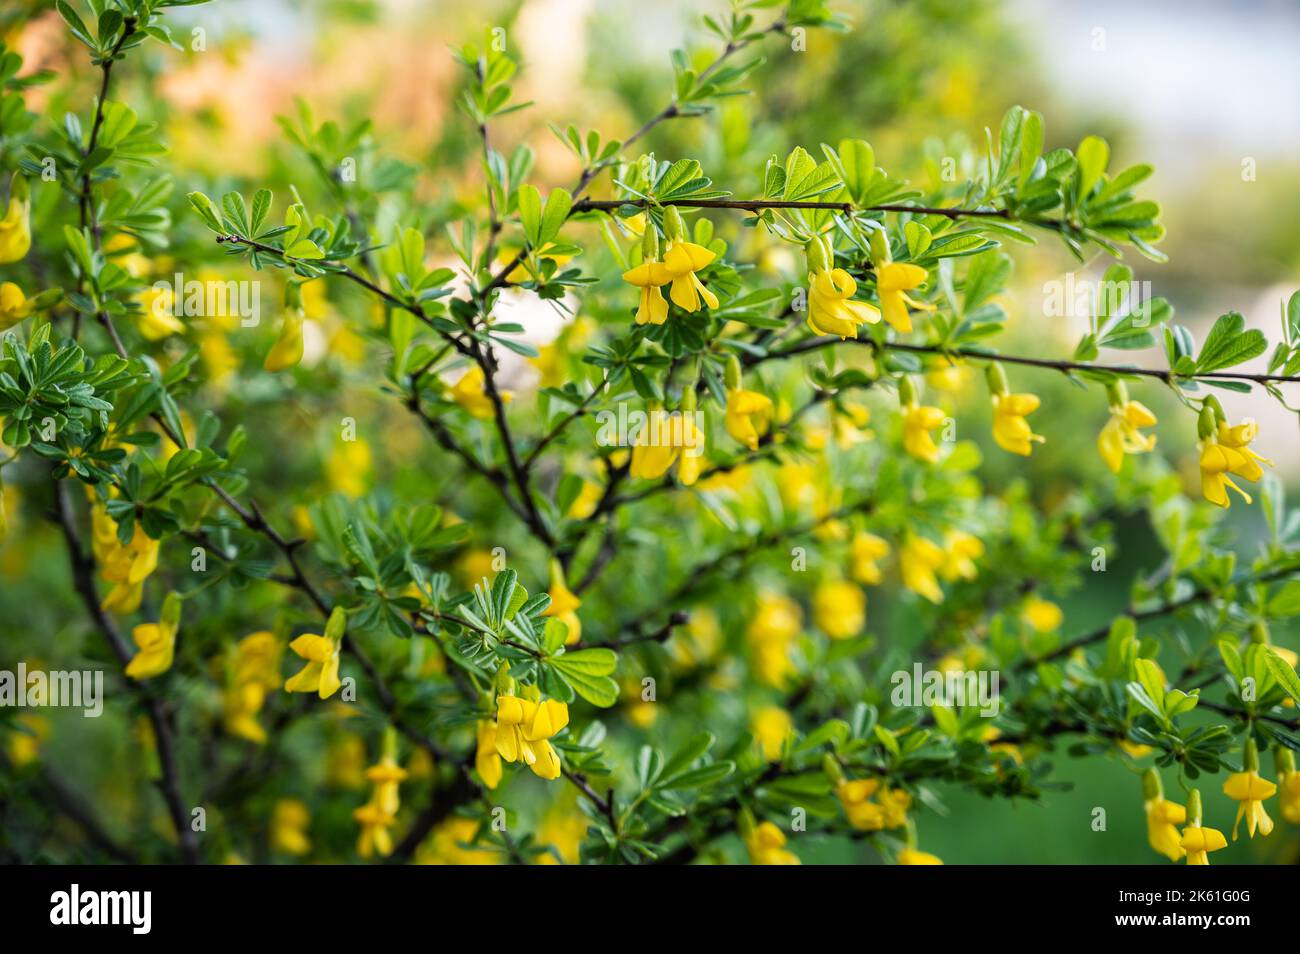 Flowers of Caragana, close-up. Shallow depth of field. Stock Photo